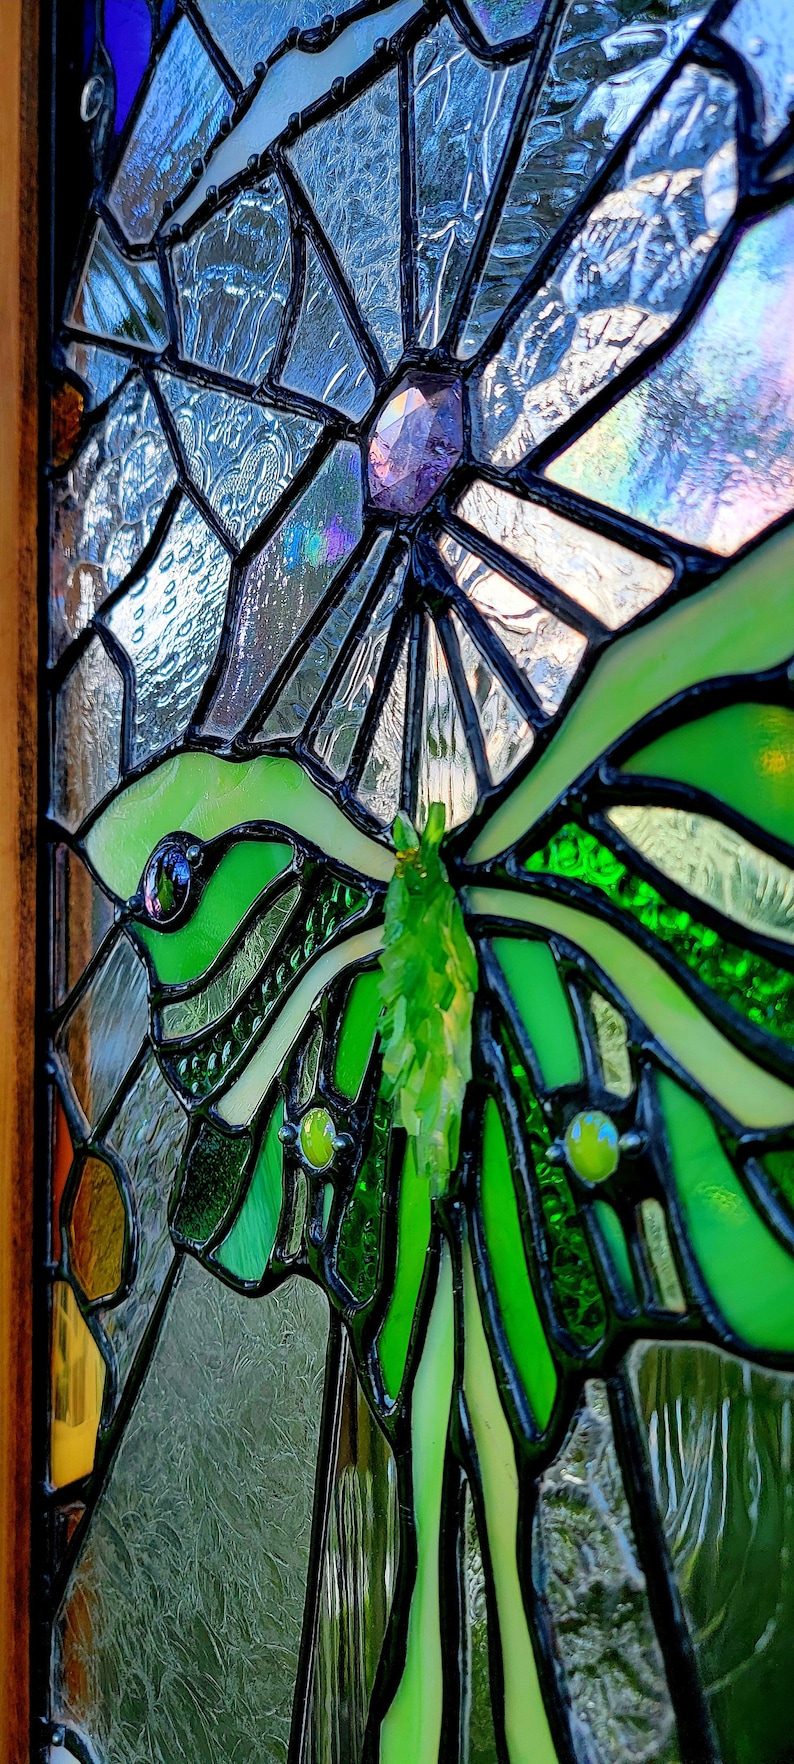 The Lunarian glass Tapestry window, luna moth, nature, plants, home decor, the sweet karma bar, stained glass window, sun catchers image 5